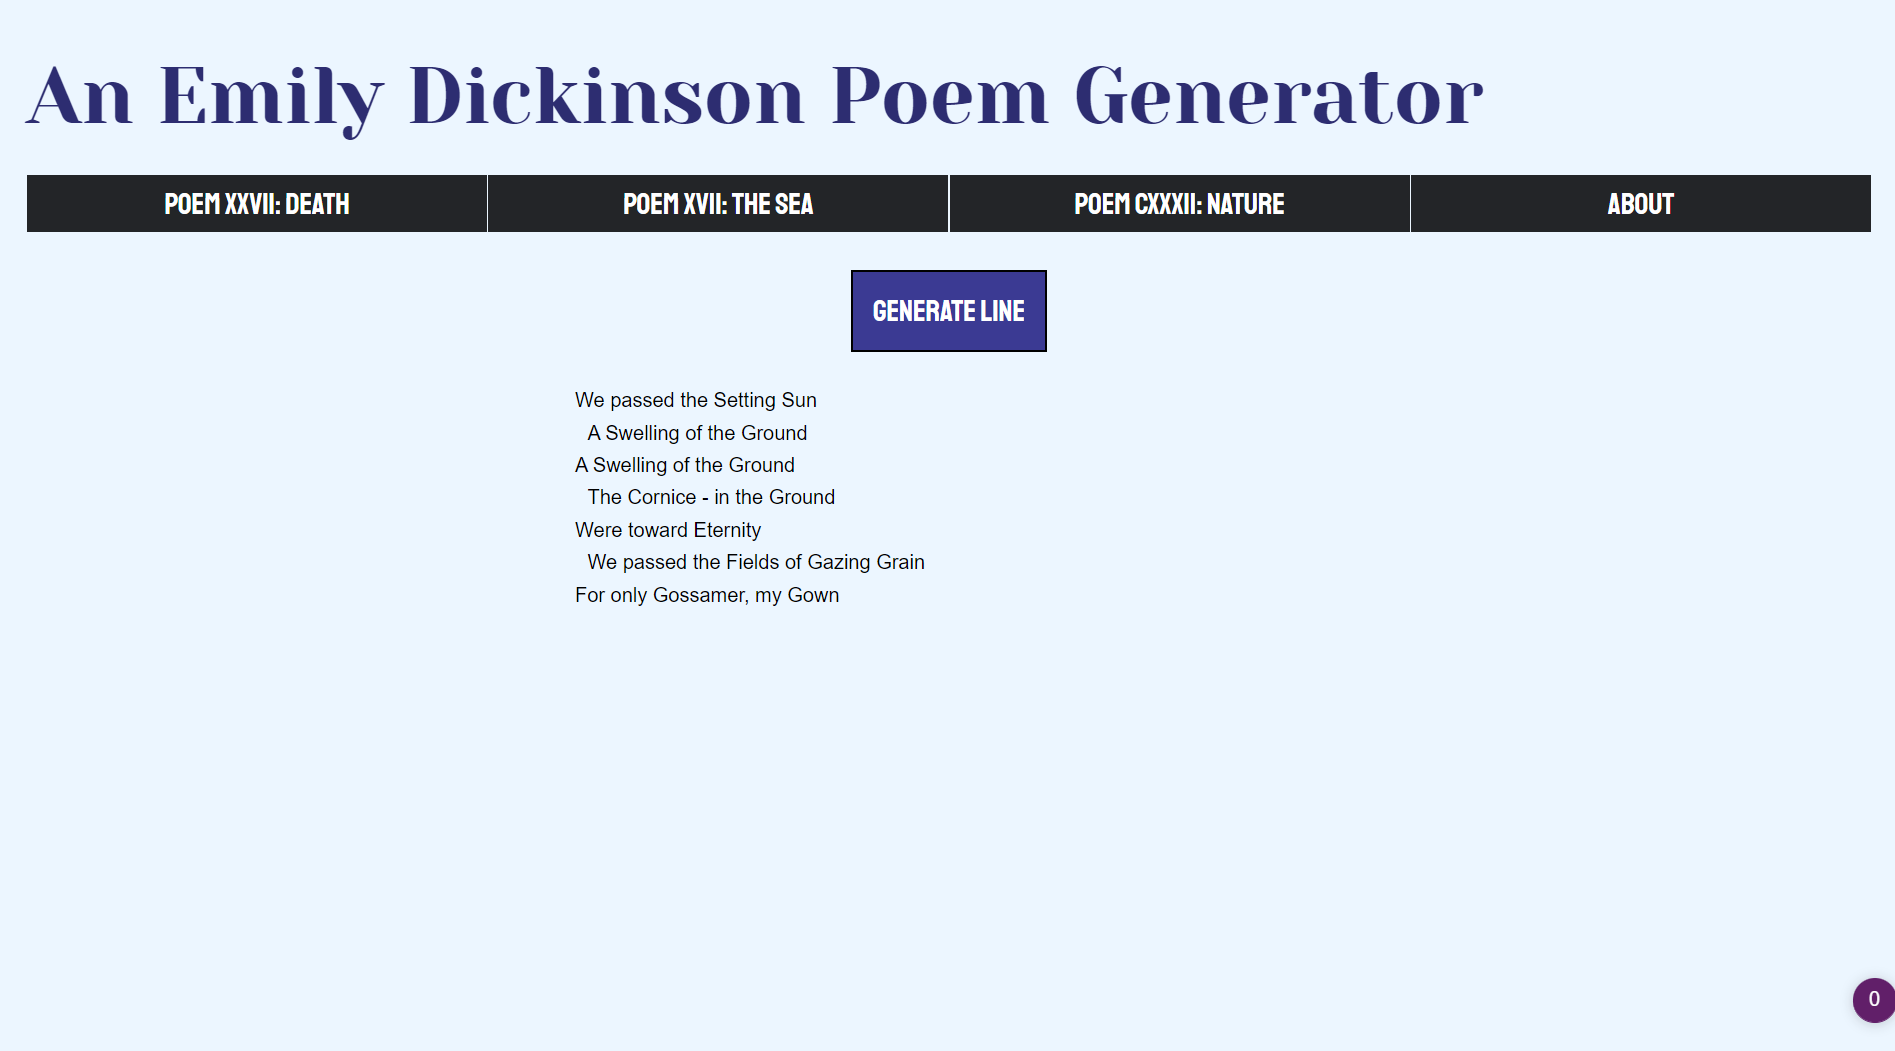 Image of a website about Emily Dickinson